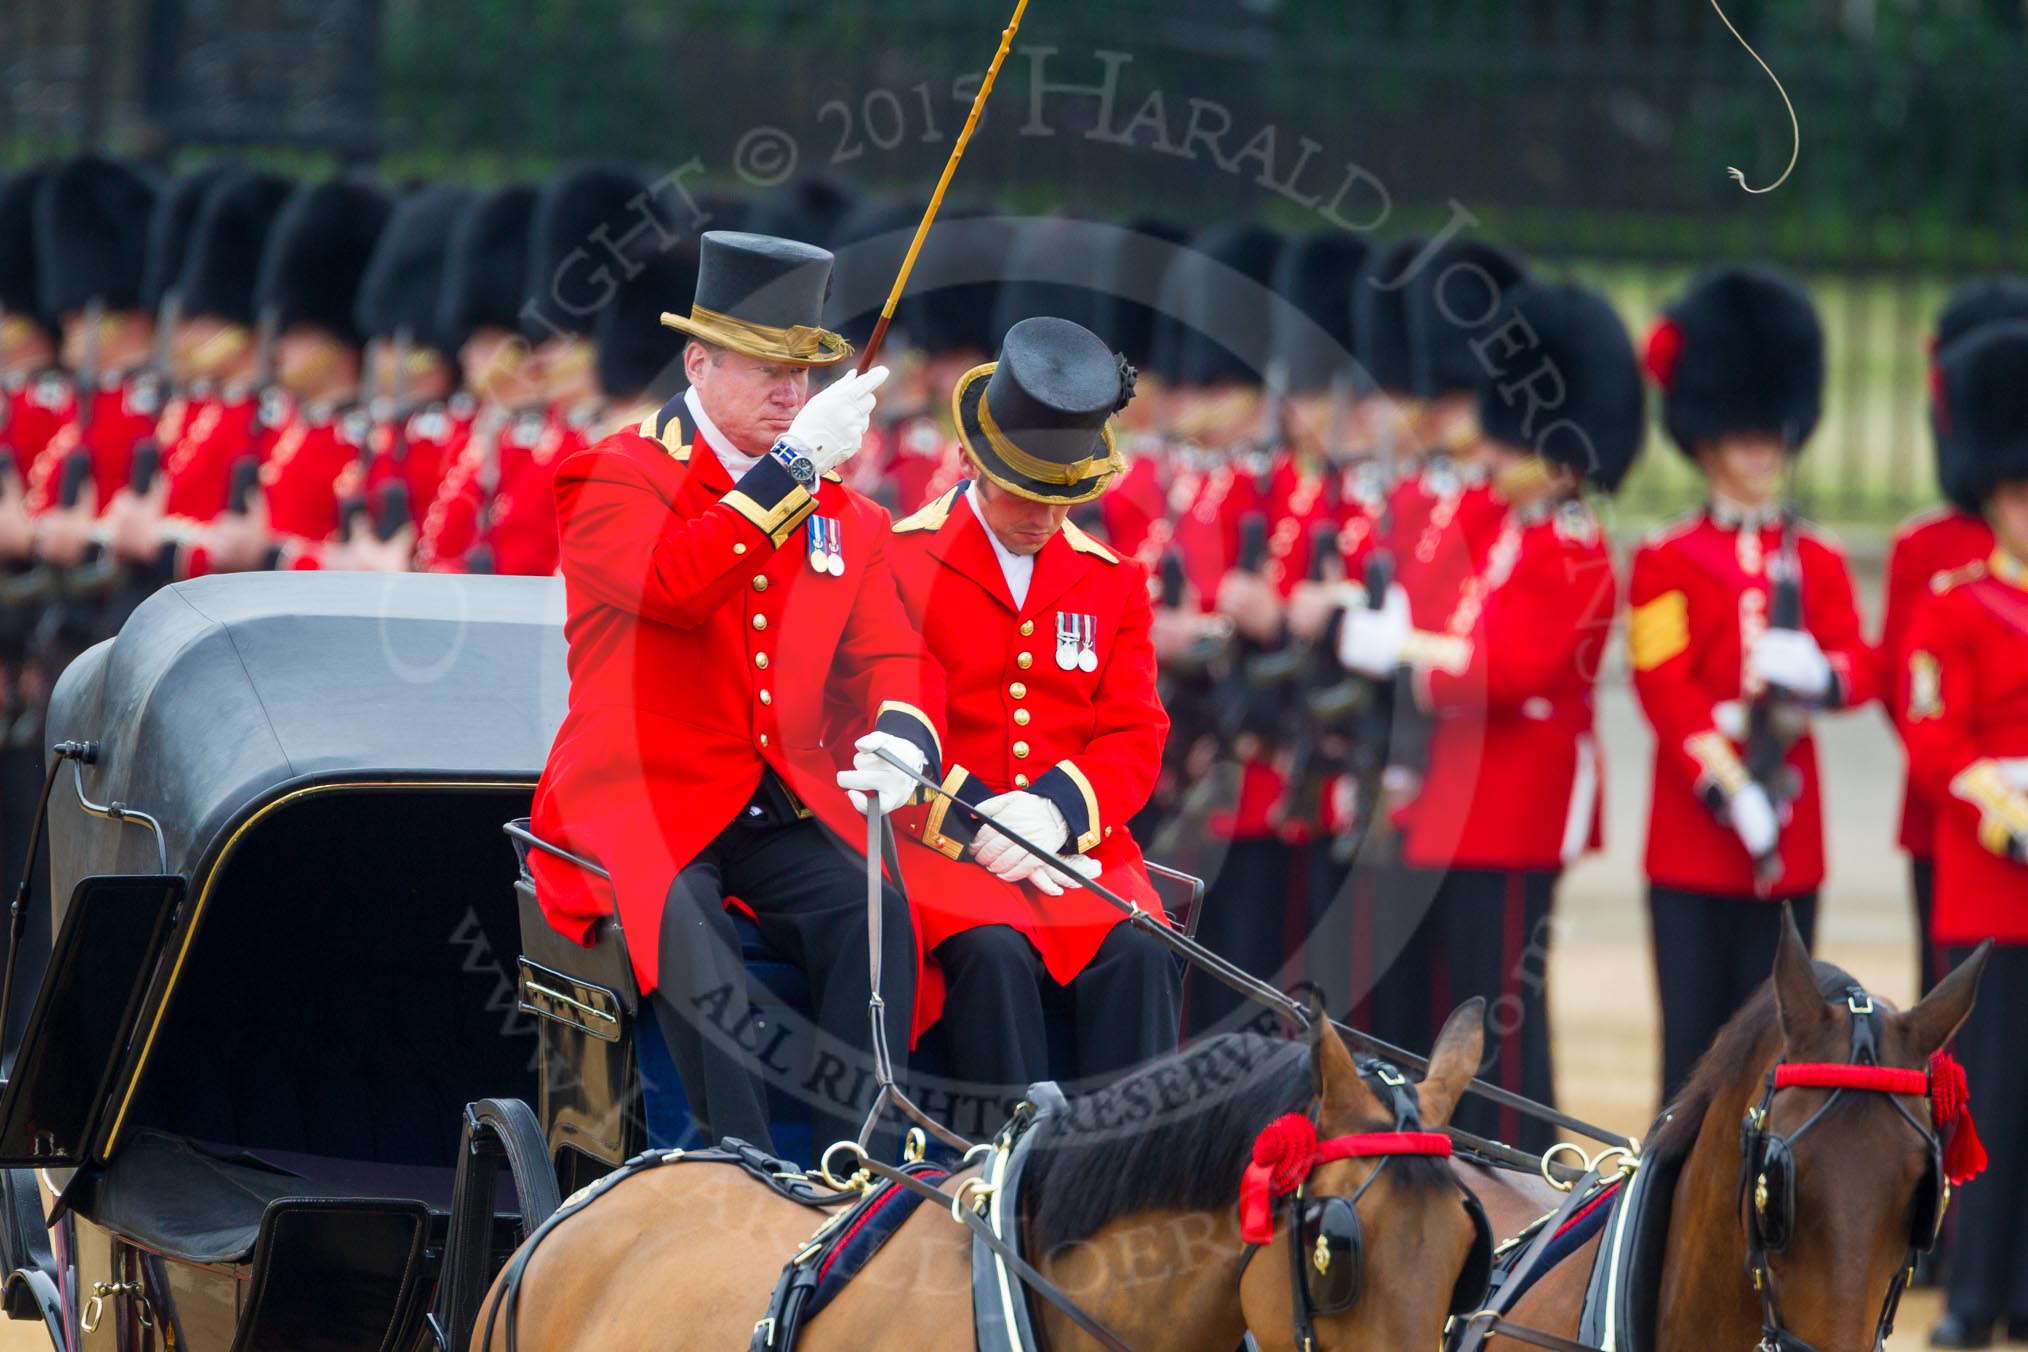 The Colonel's Review 2016.
Horse Guards Parade, Westminster,
London,

United Kingdom,
on 04 June 2016 at 10:51, image #136